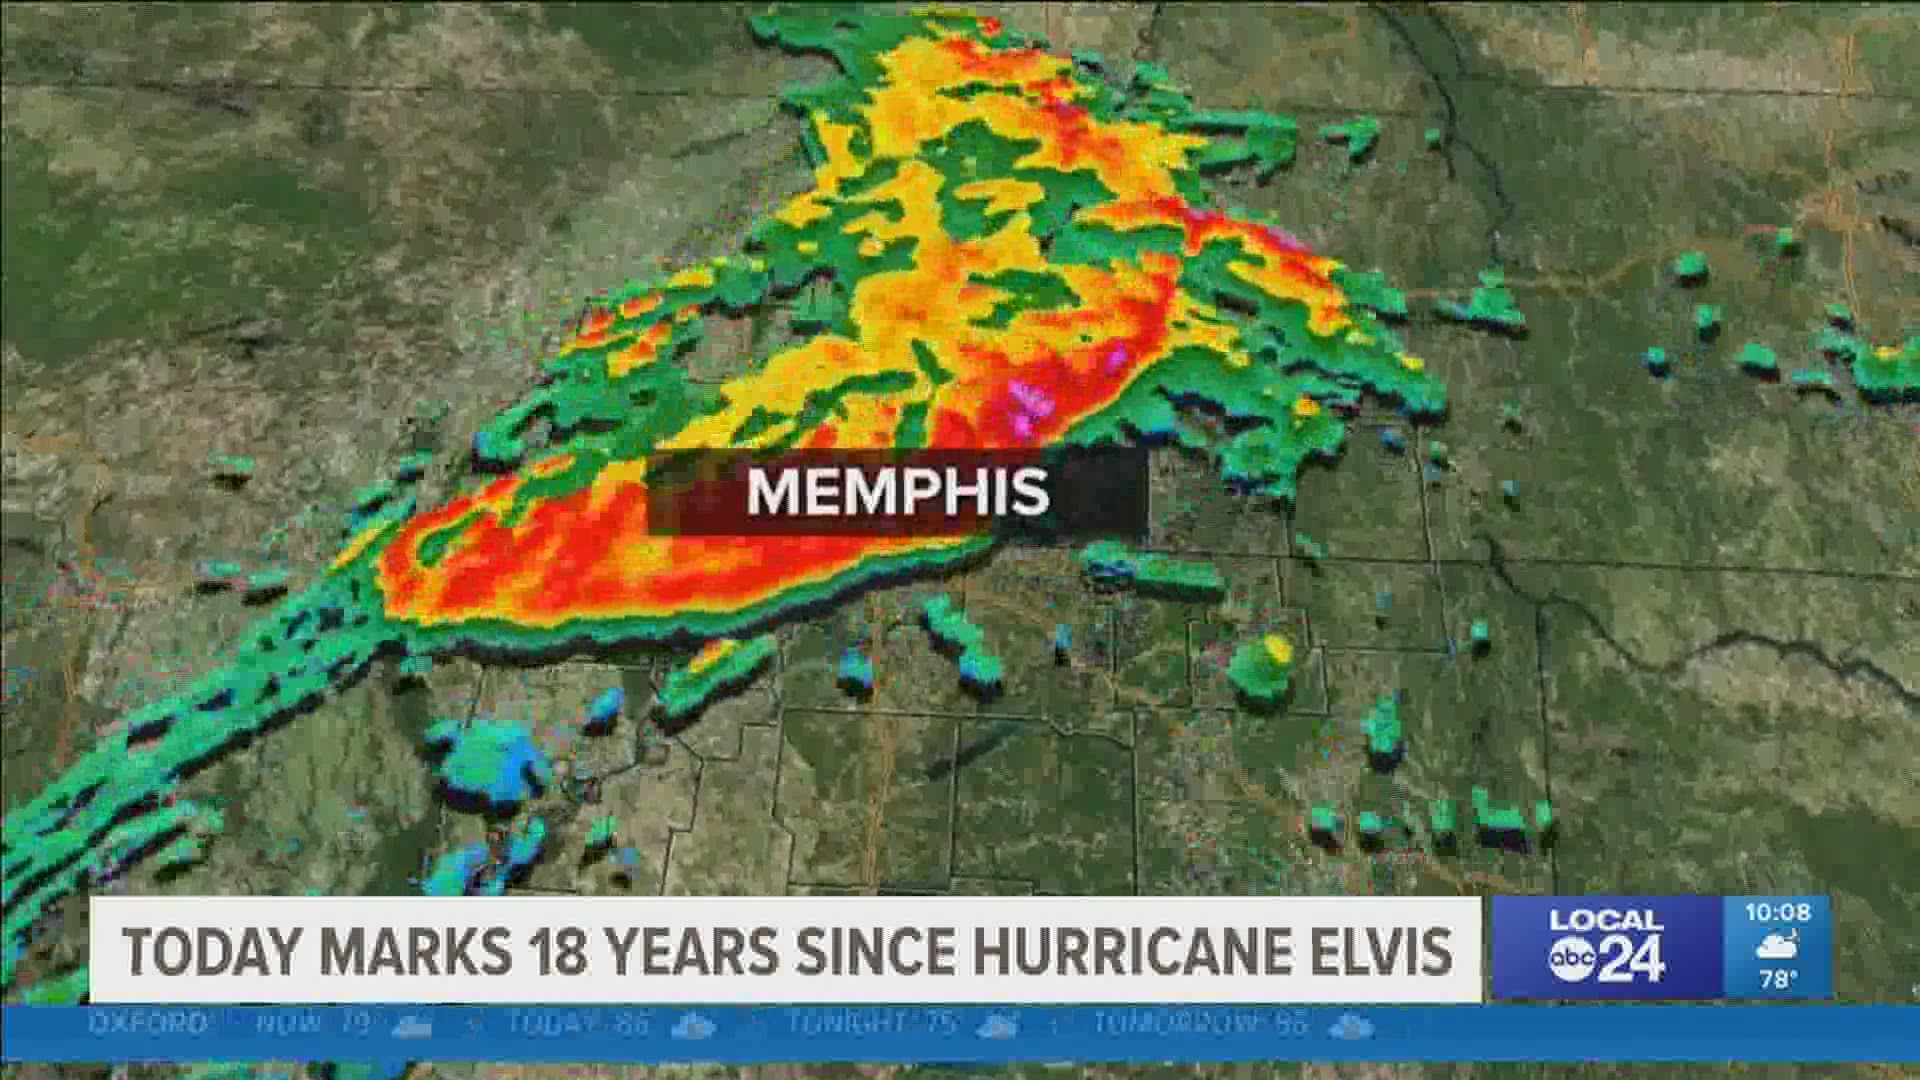 The storm knocked out power to over 70% of the City of Memphis and resulted in several fatalities.